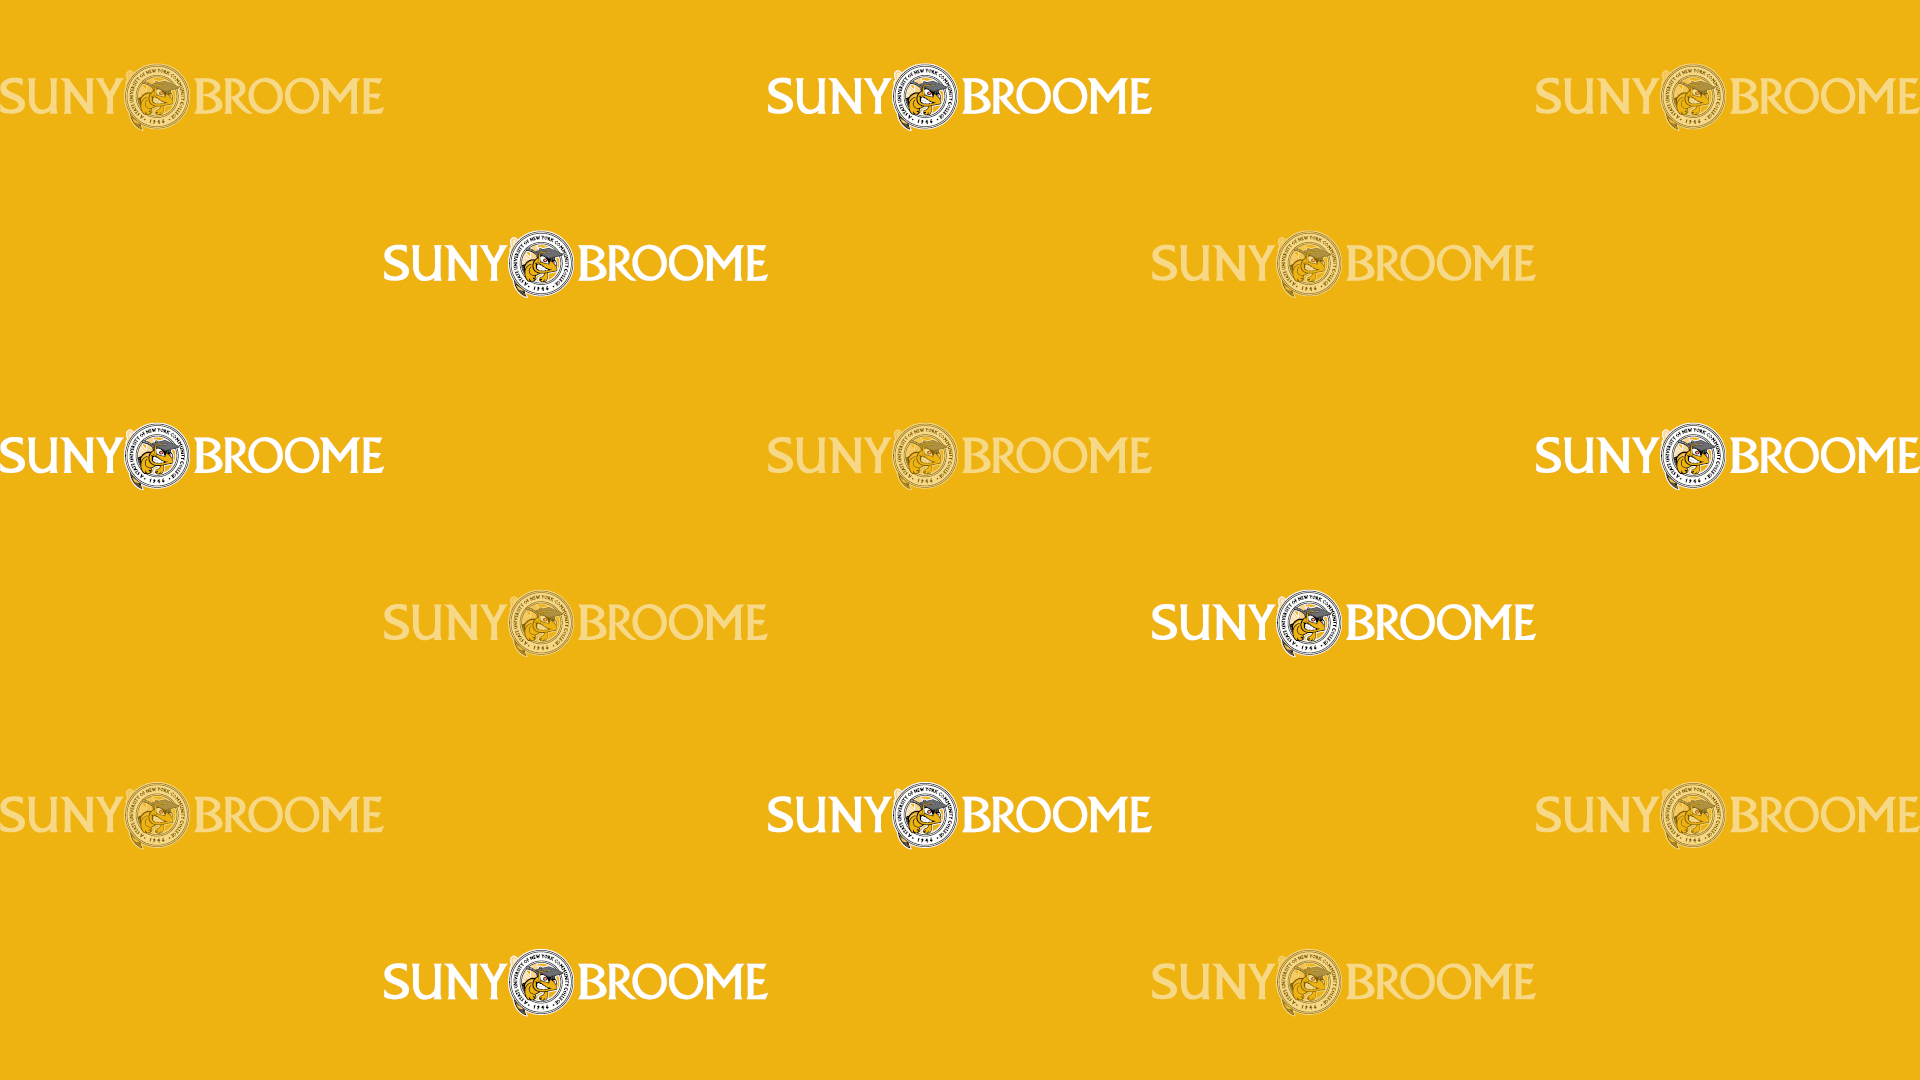 Download Zoom virtual background with white SUNY Broome logo tiled on yellow background (jpg)